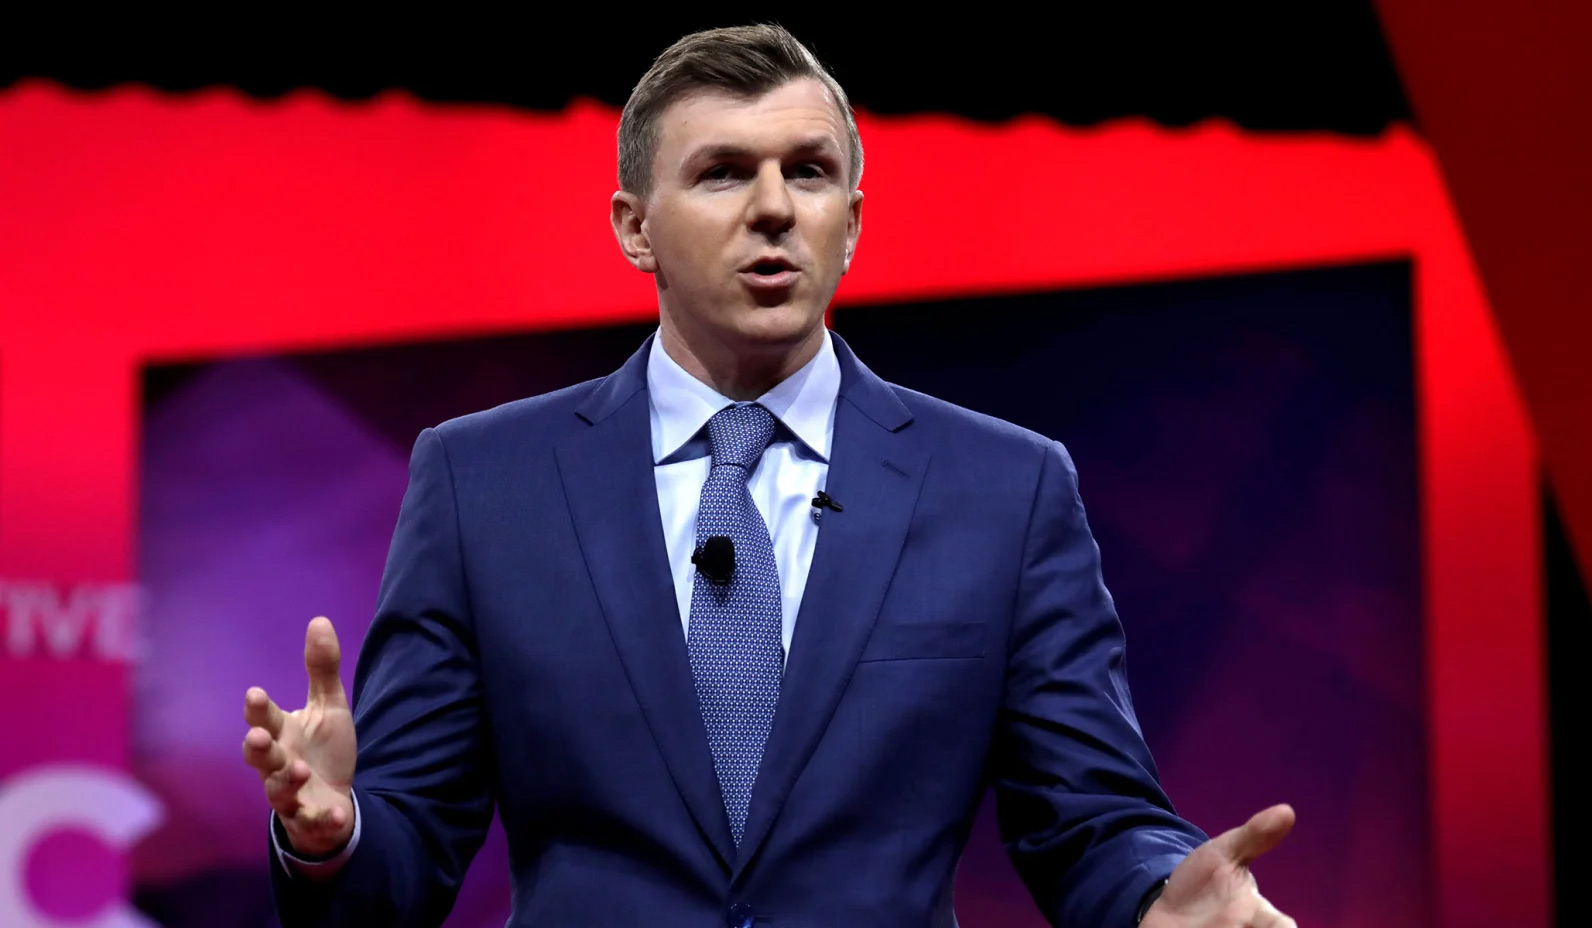 Founder James O’Keefe Claims Project Veritas Ouster Linked to Pfizer Sting in Farewell to Staff